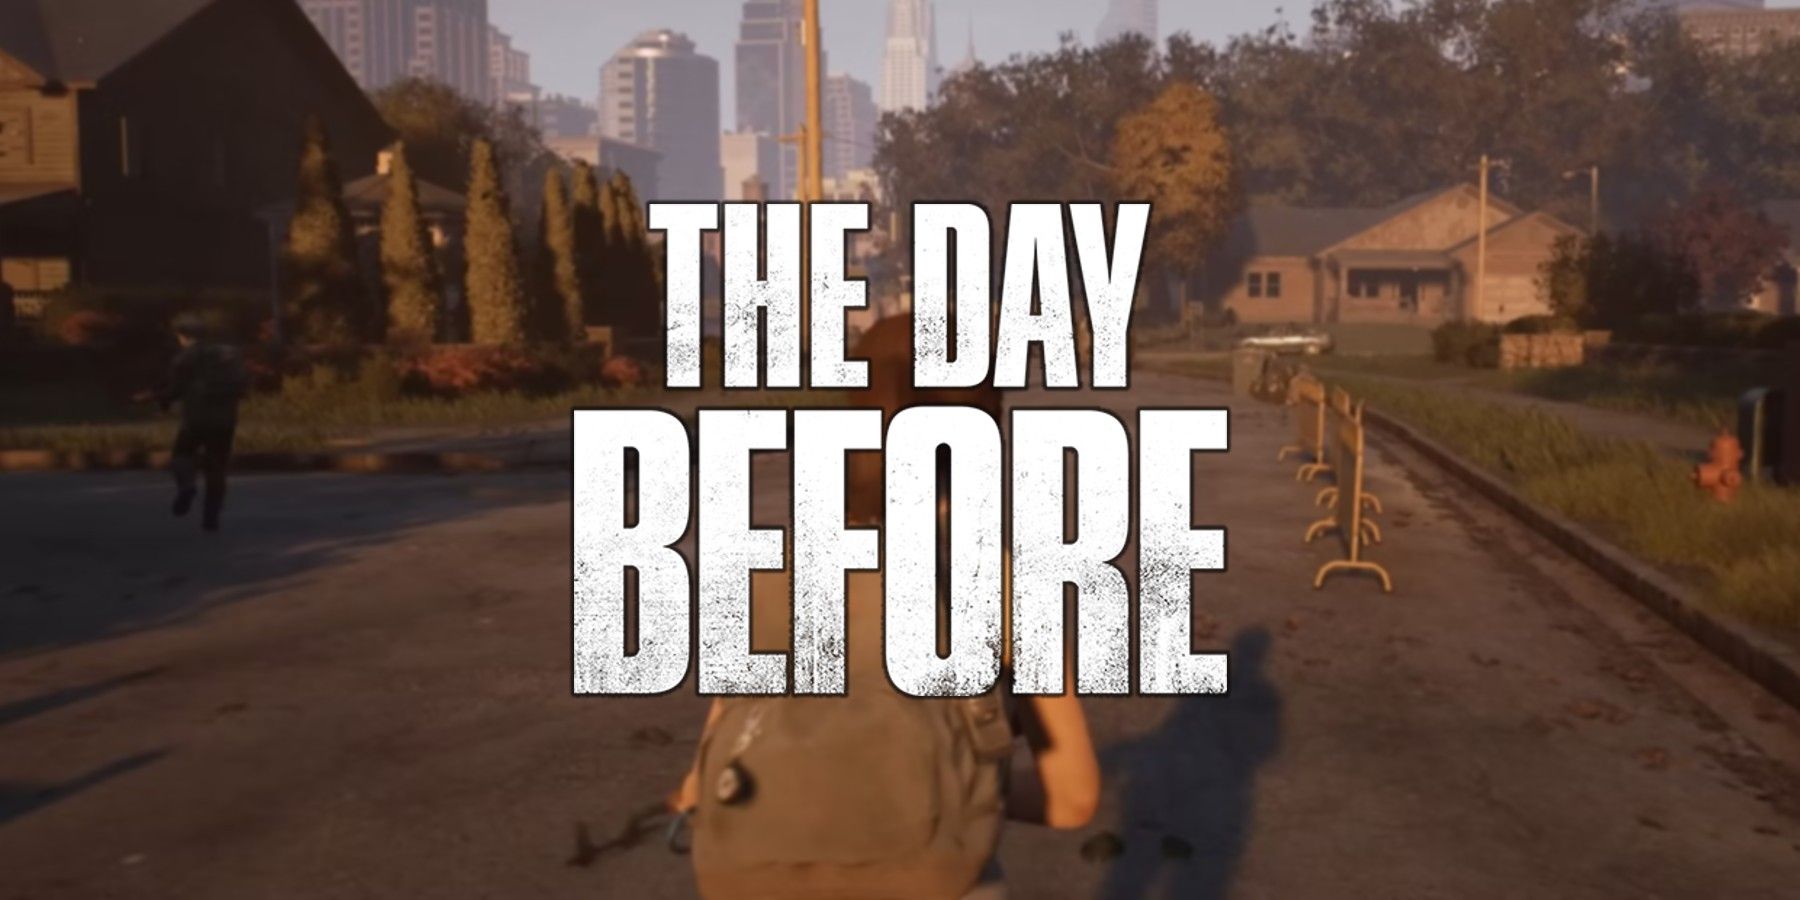 The Day Before - New open-world survival MMO announced for PC - MMO Culture